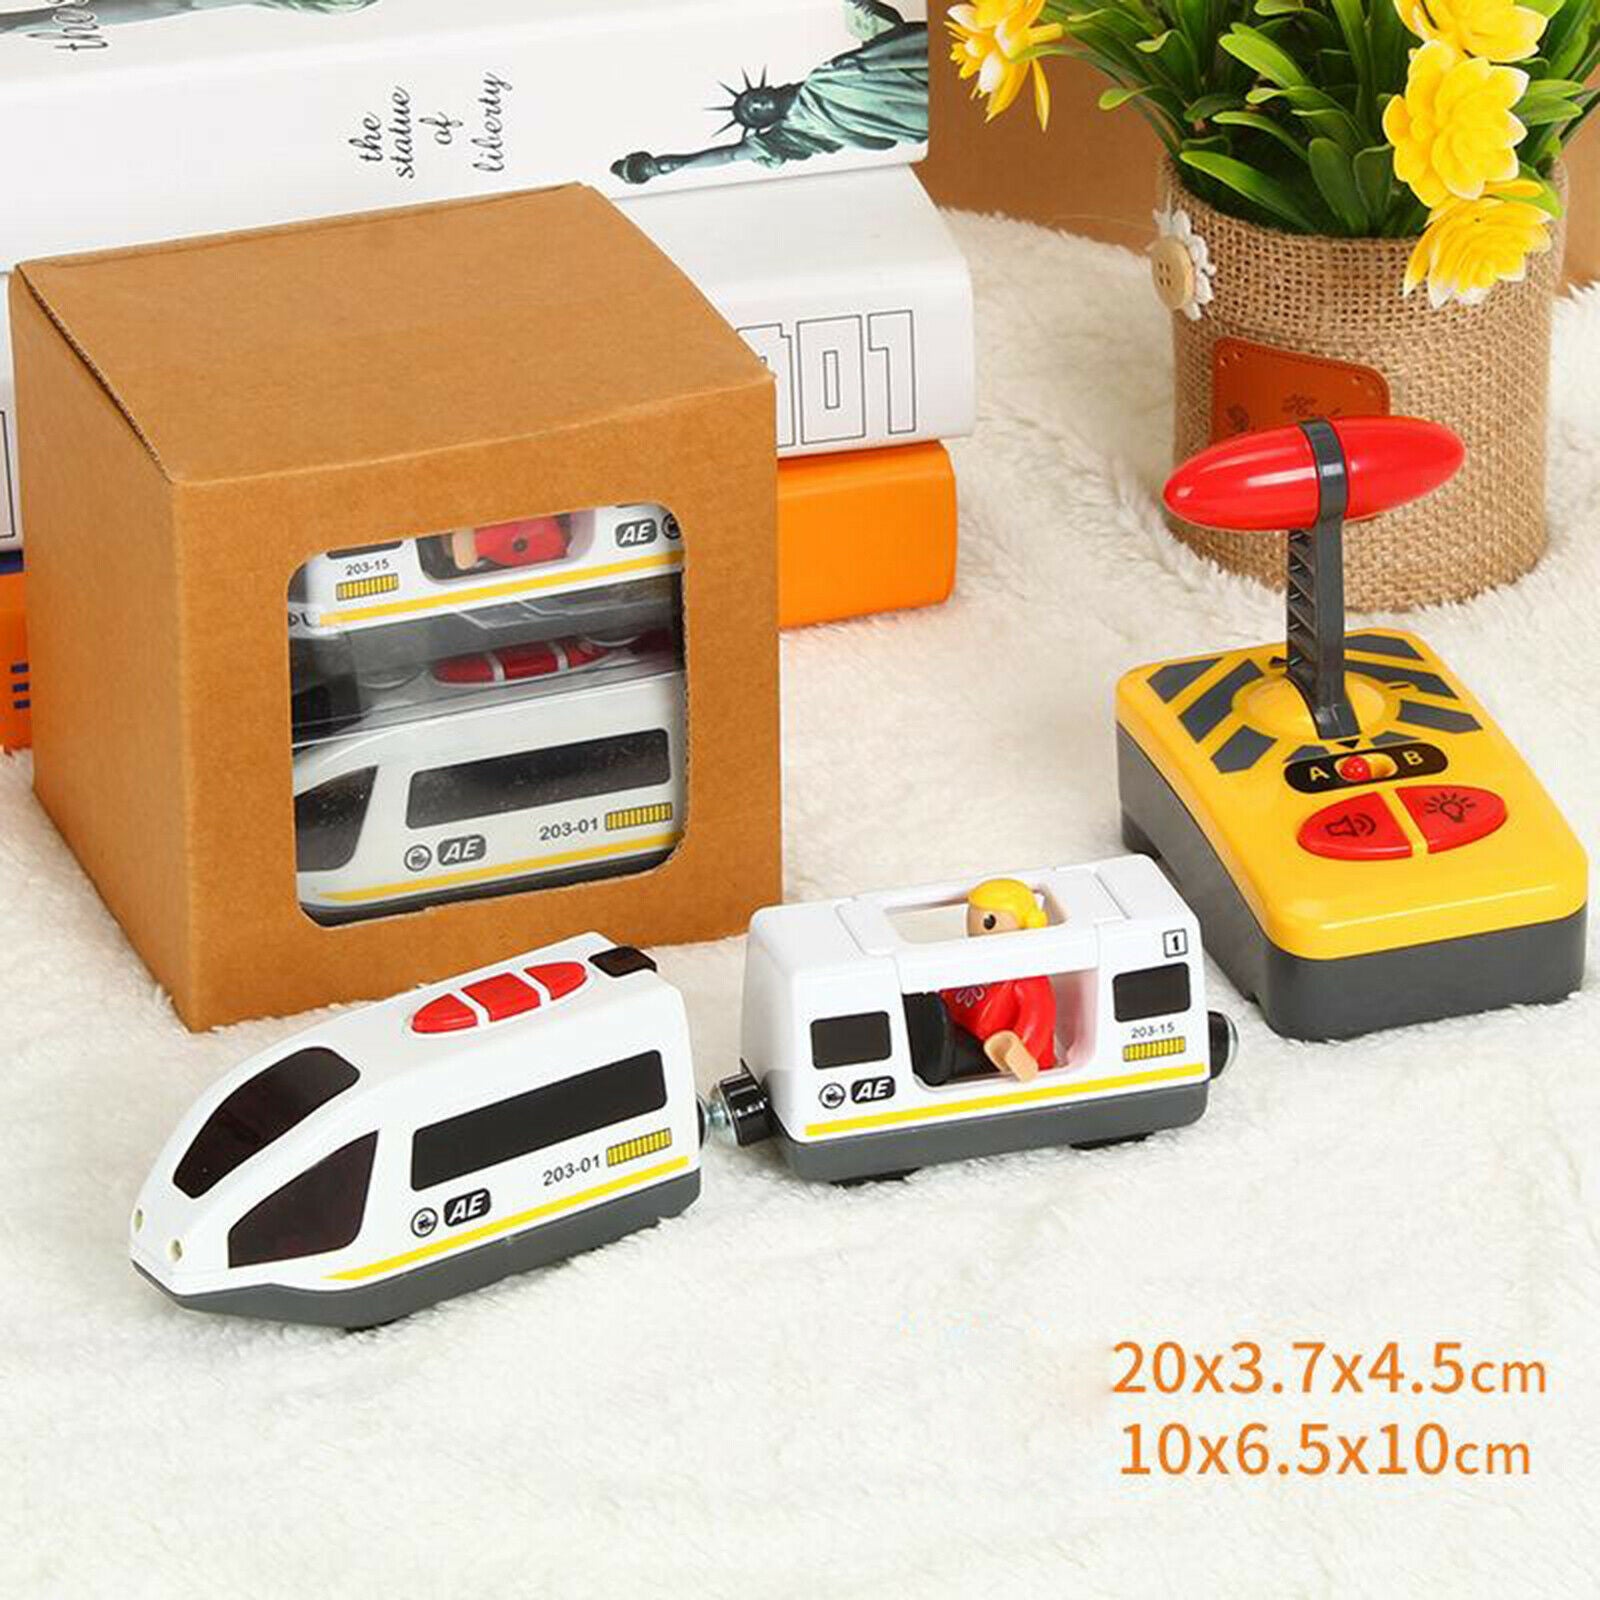 Remote Control Magnetic Train Toys Set Hobby Train Fits Most Wooden Tracks